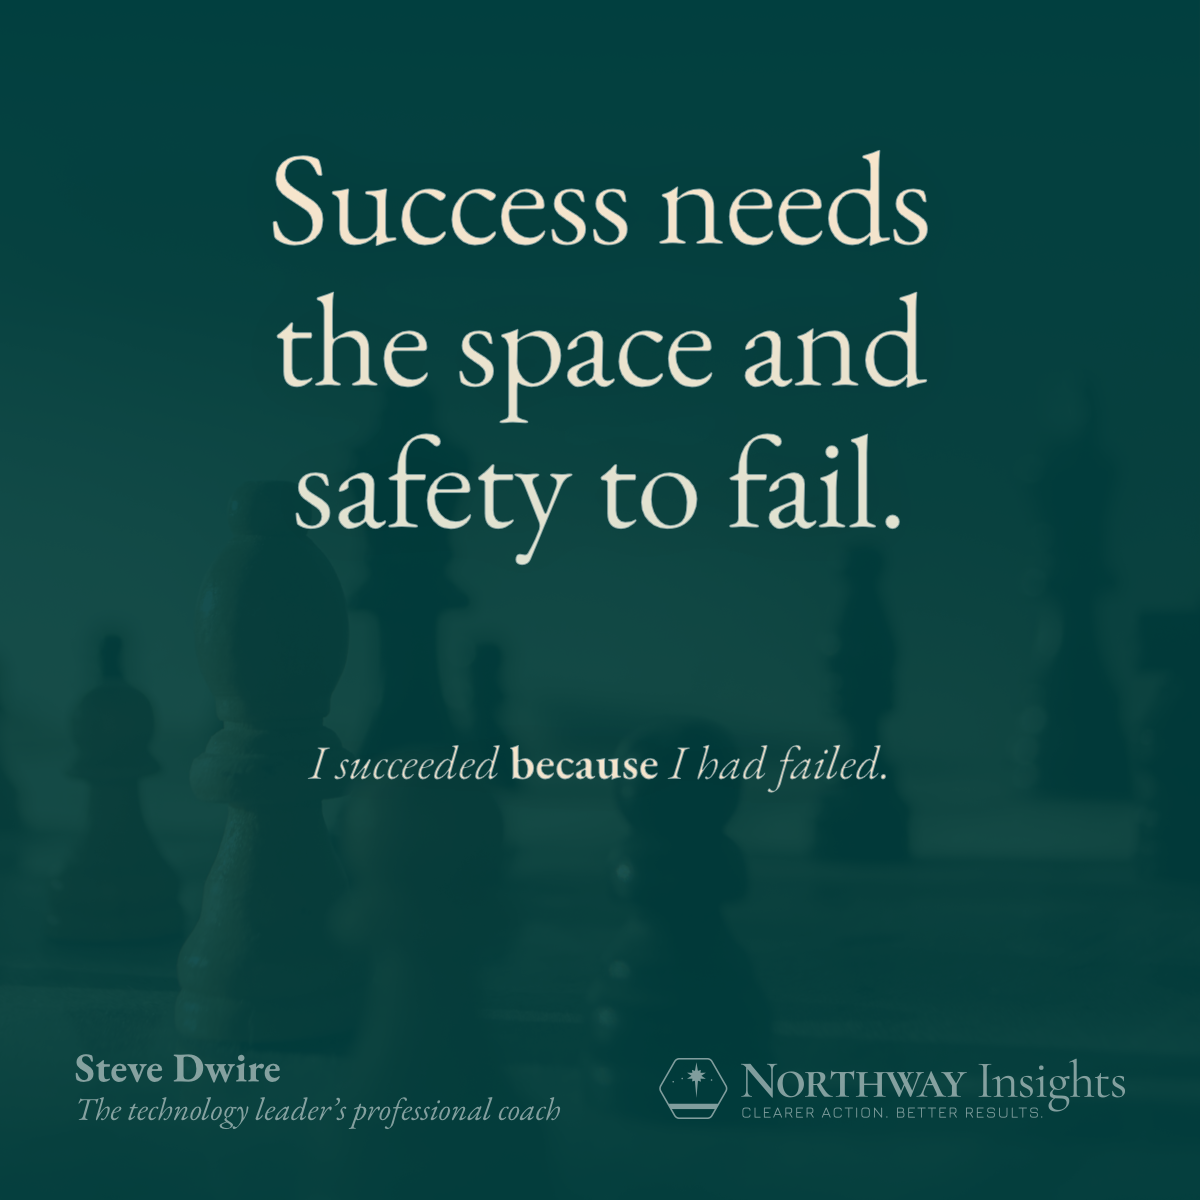 Success needs the space and safety to fail. (I succeeded *because* I had failed.)